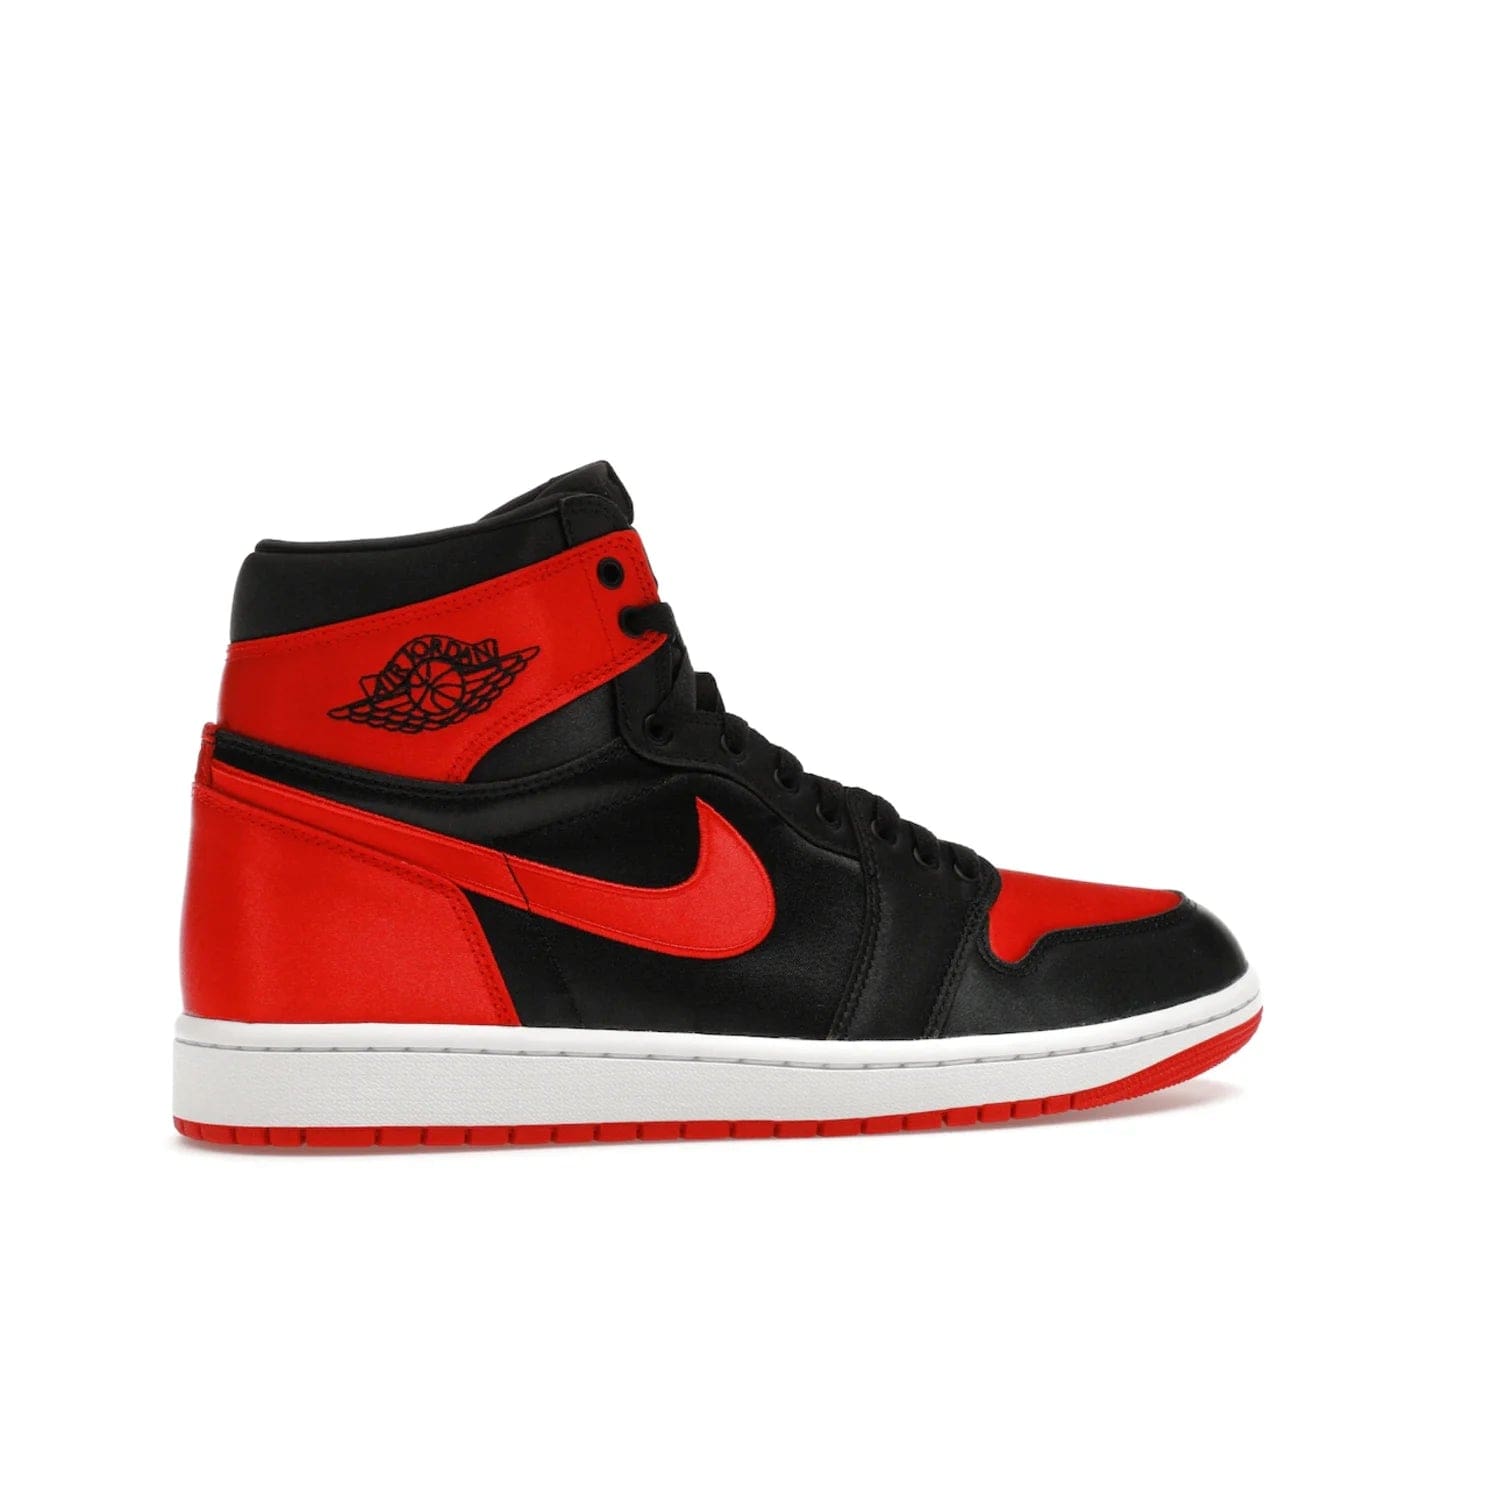 Jordan 1 Retro High OG Satin Bred (Women's) - Image 35 - Only at www.BallersClubKickz.com - Introducing the Jordan 1 Retro High OG Satin Bred (Women's). Luxe satin finish, contrasting hues & classic accents. Trending sneakers symbolizing timelessness & heritage. Make a bold statement with this iconic shoe. Available October 4, 2023.